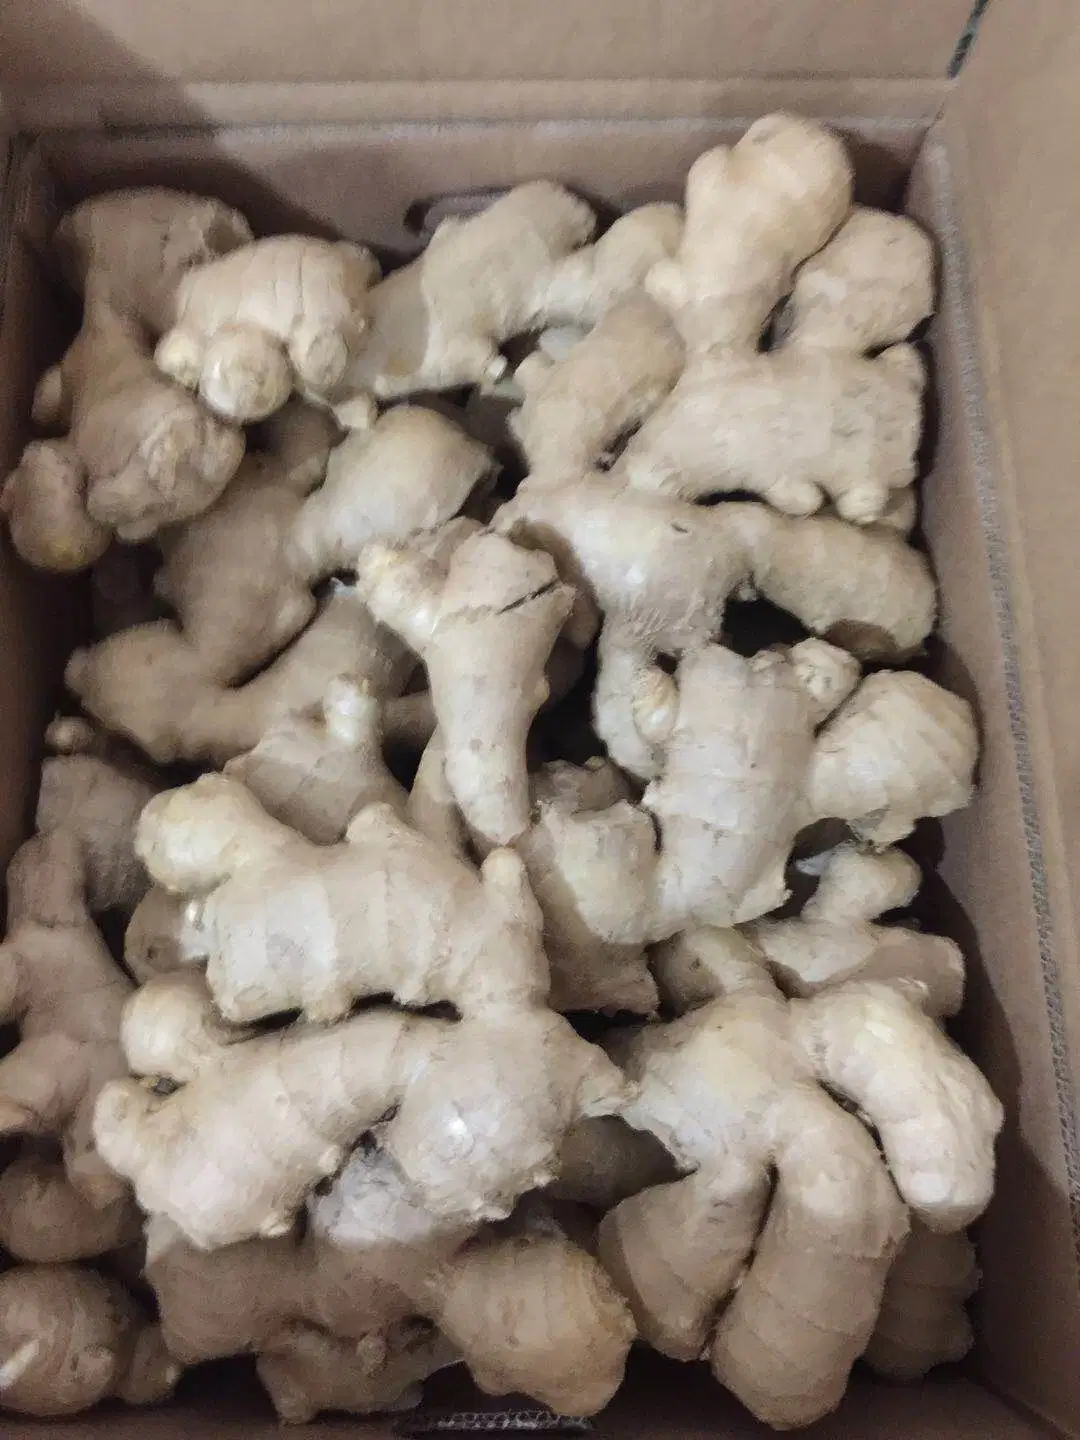 Air Dried Ginger with PVC Carton